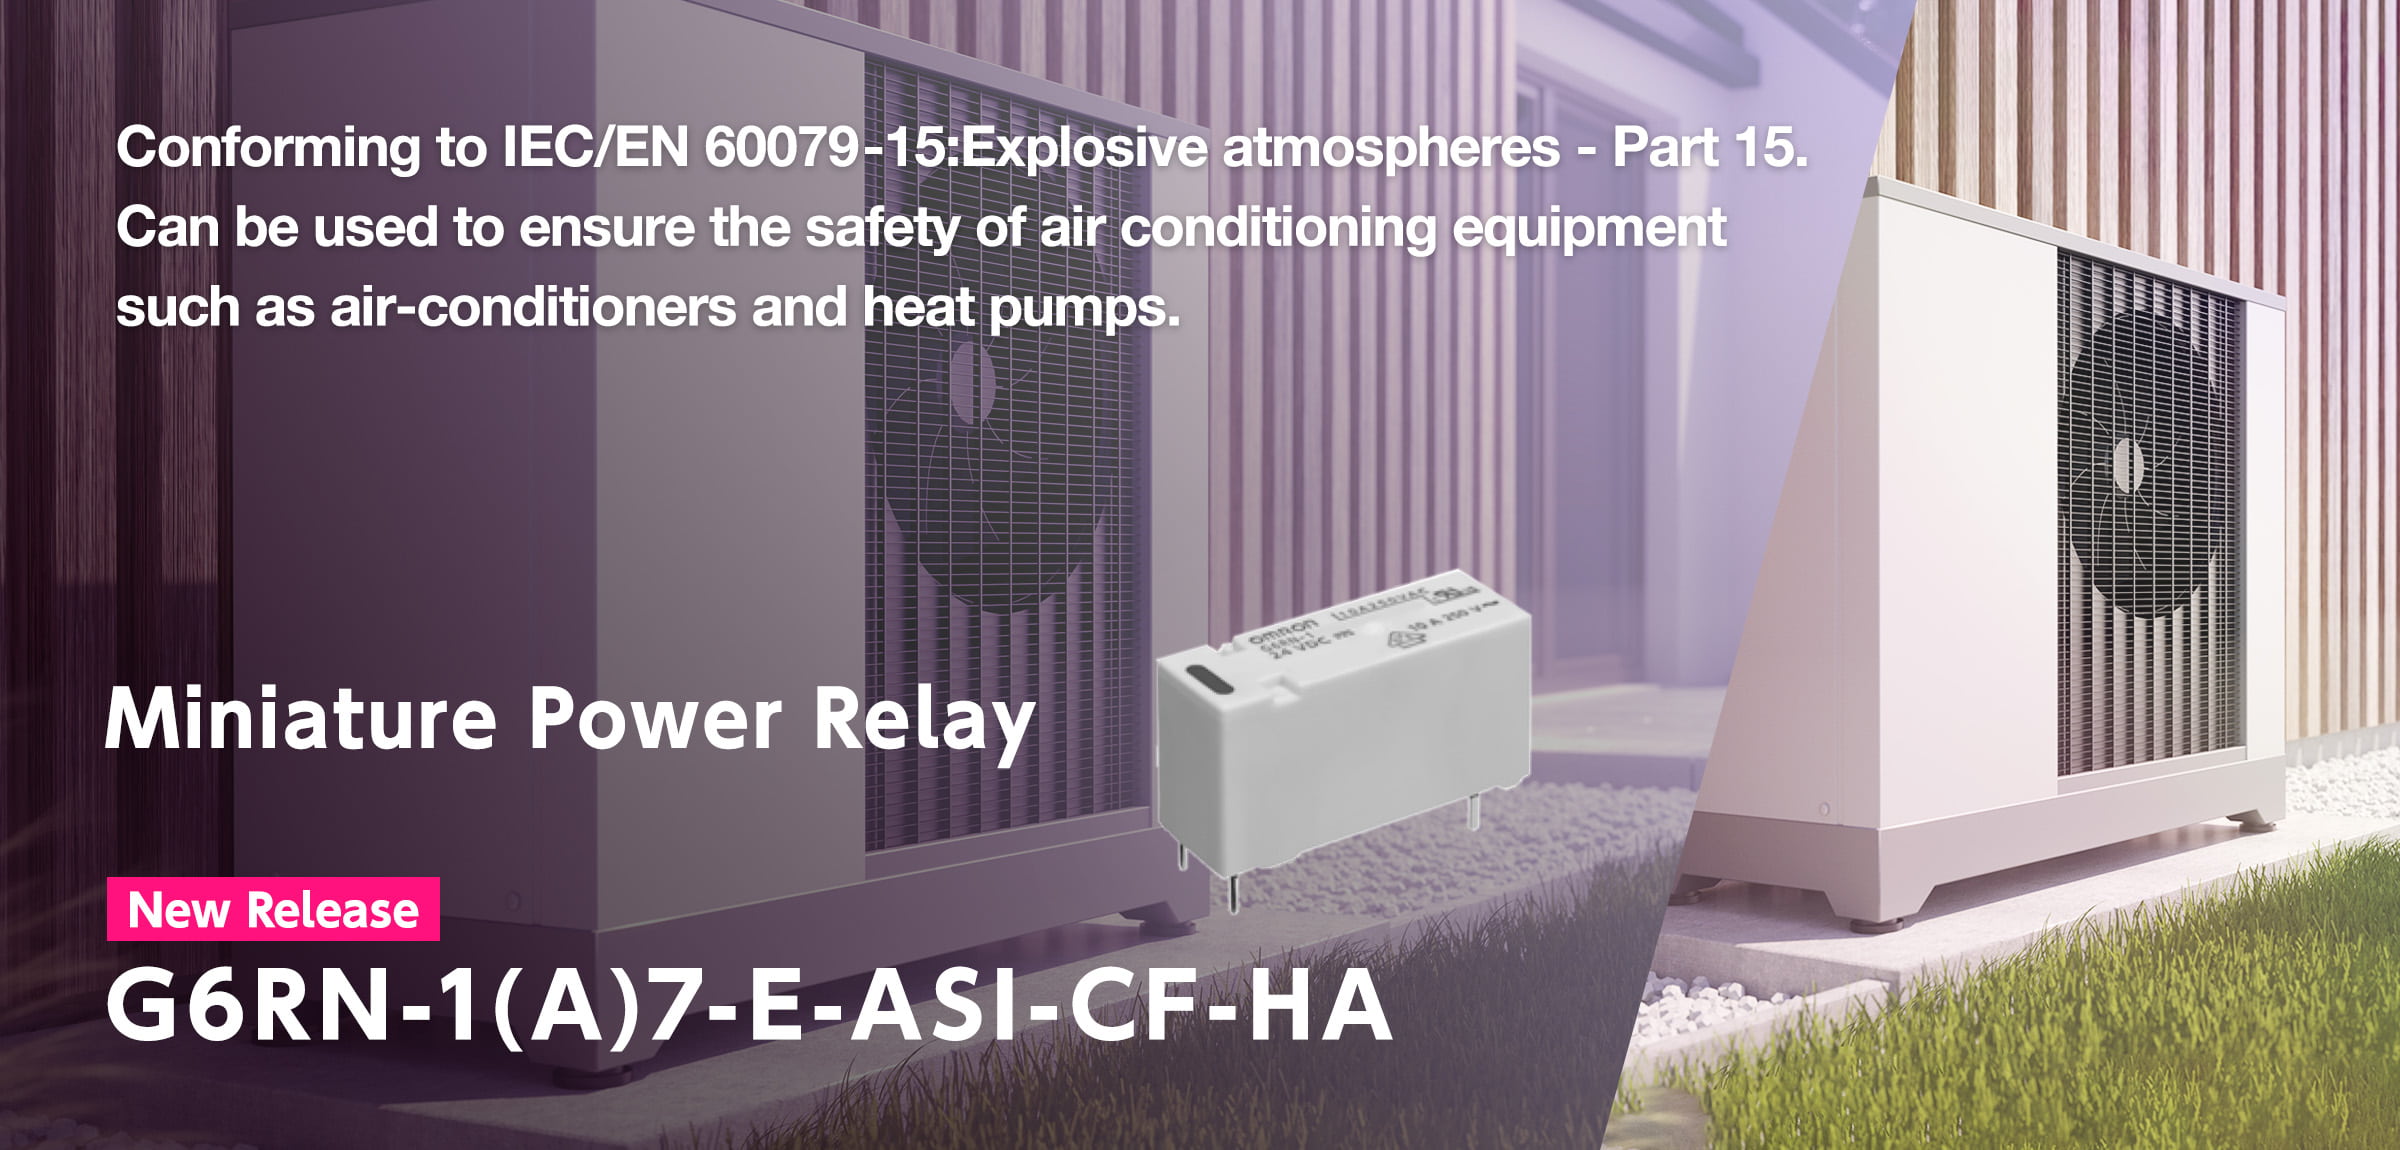 Can be used to ensure the safety of air conditioning equipment such as air-conditioners and heat pumps. Miniature Power Relay G6RN-1(A)7-E-ASI-CF-HA